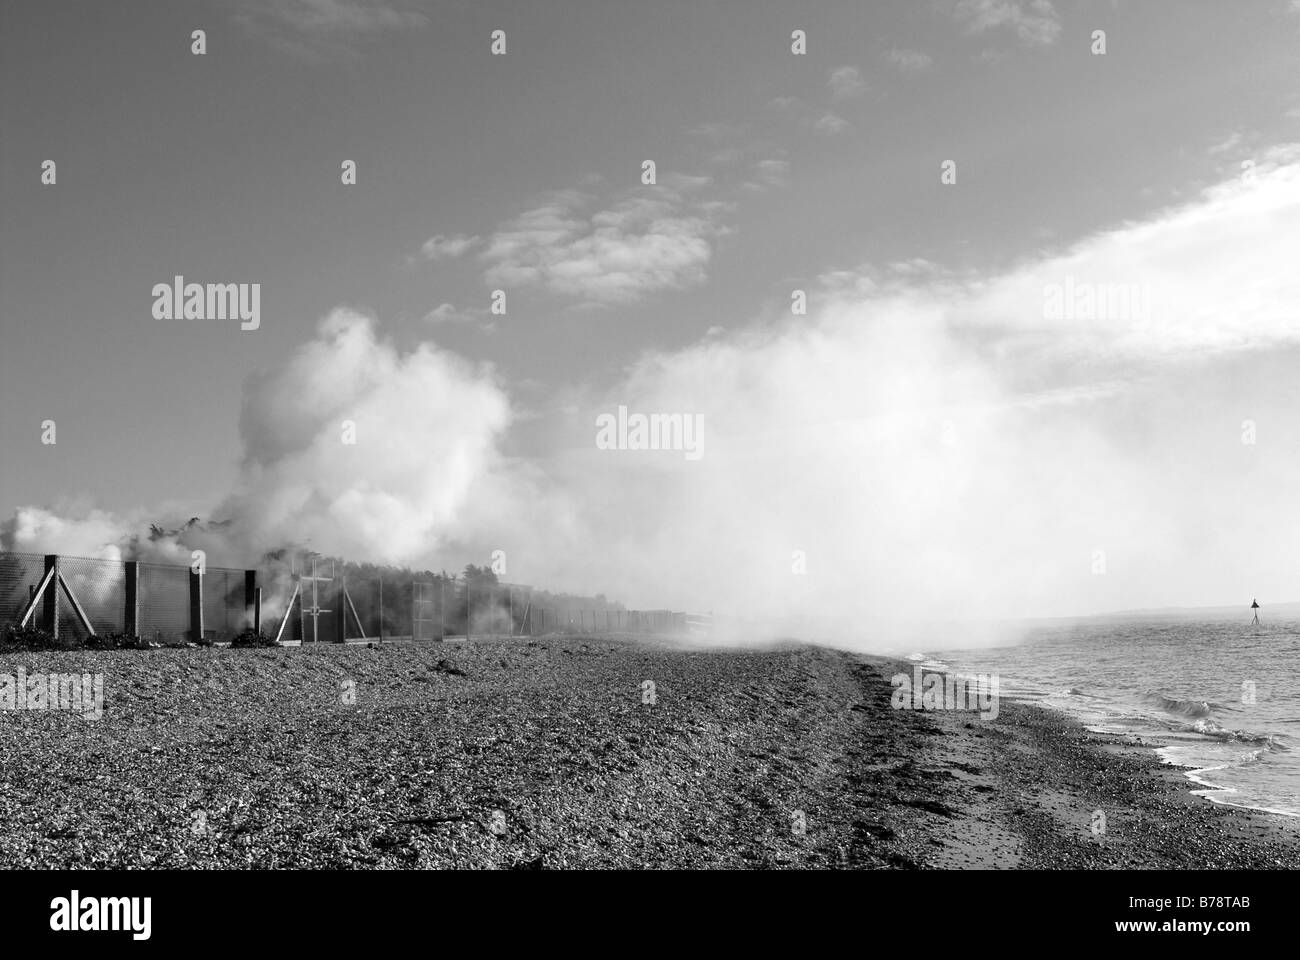 Fire on the beach in black and white Stock Photo